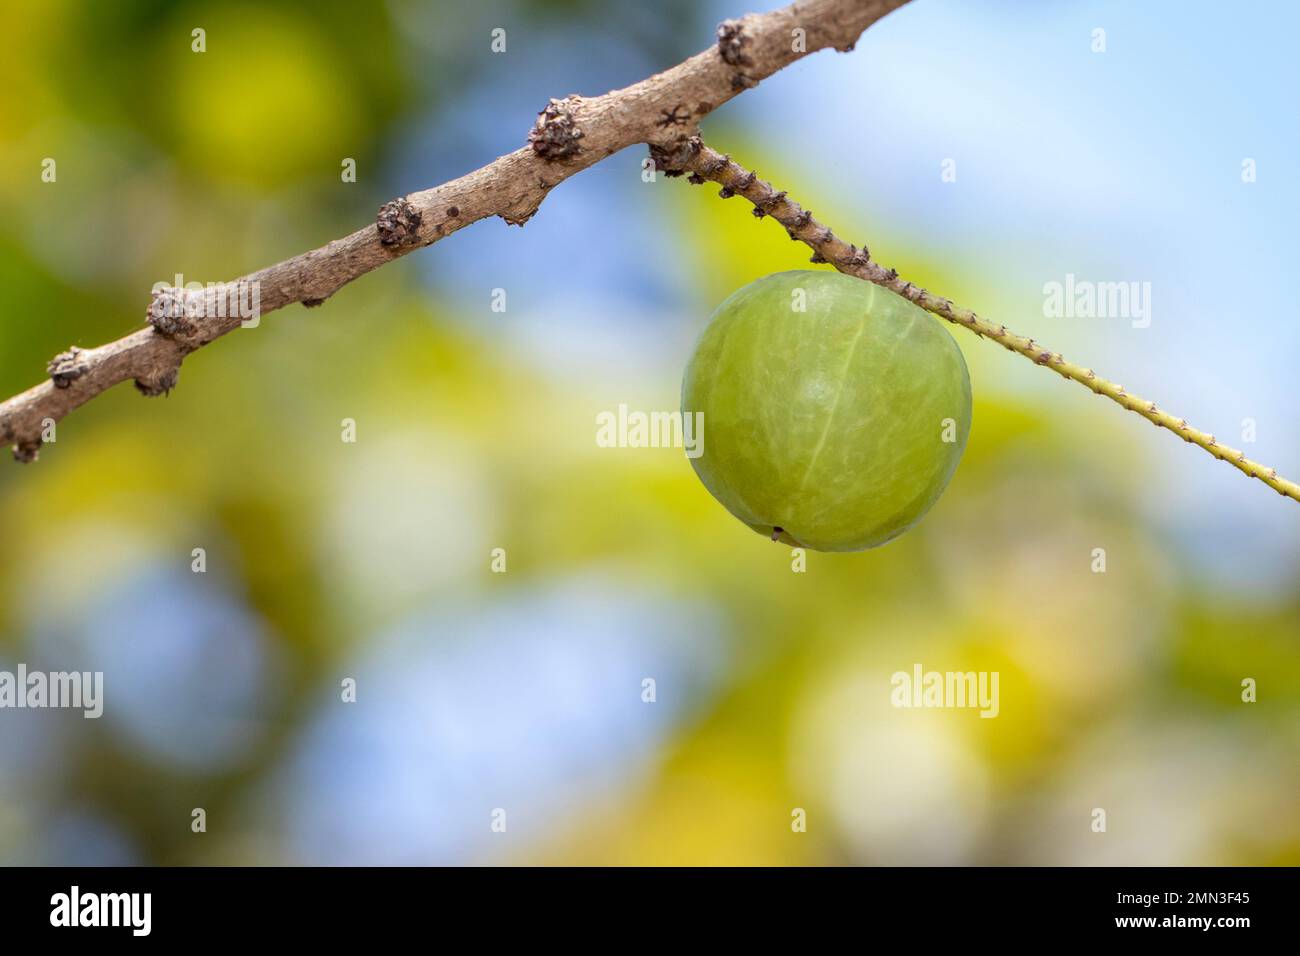 Image of fresh indian gooseberry on the tree. Green fruits that are high in vitamins. Stock Photo